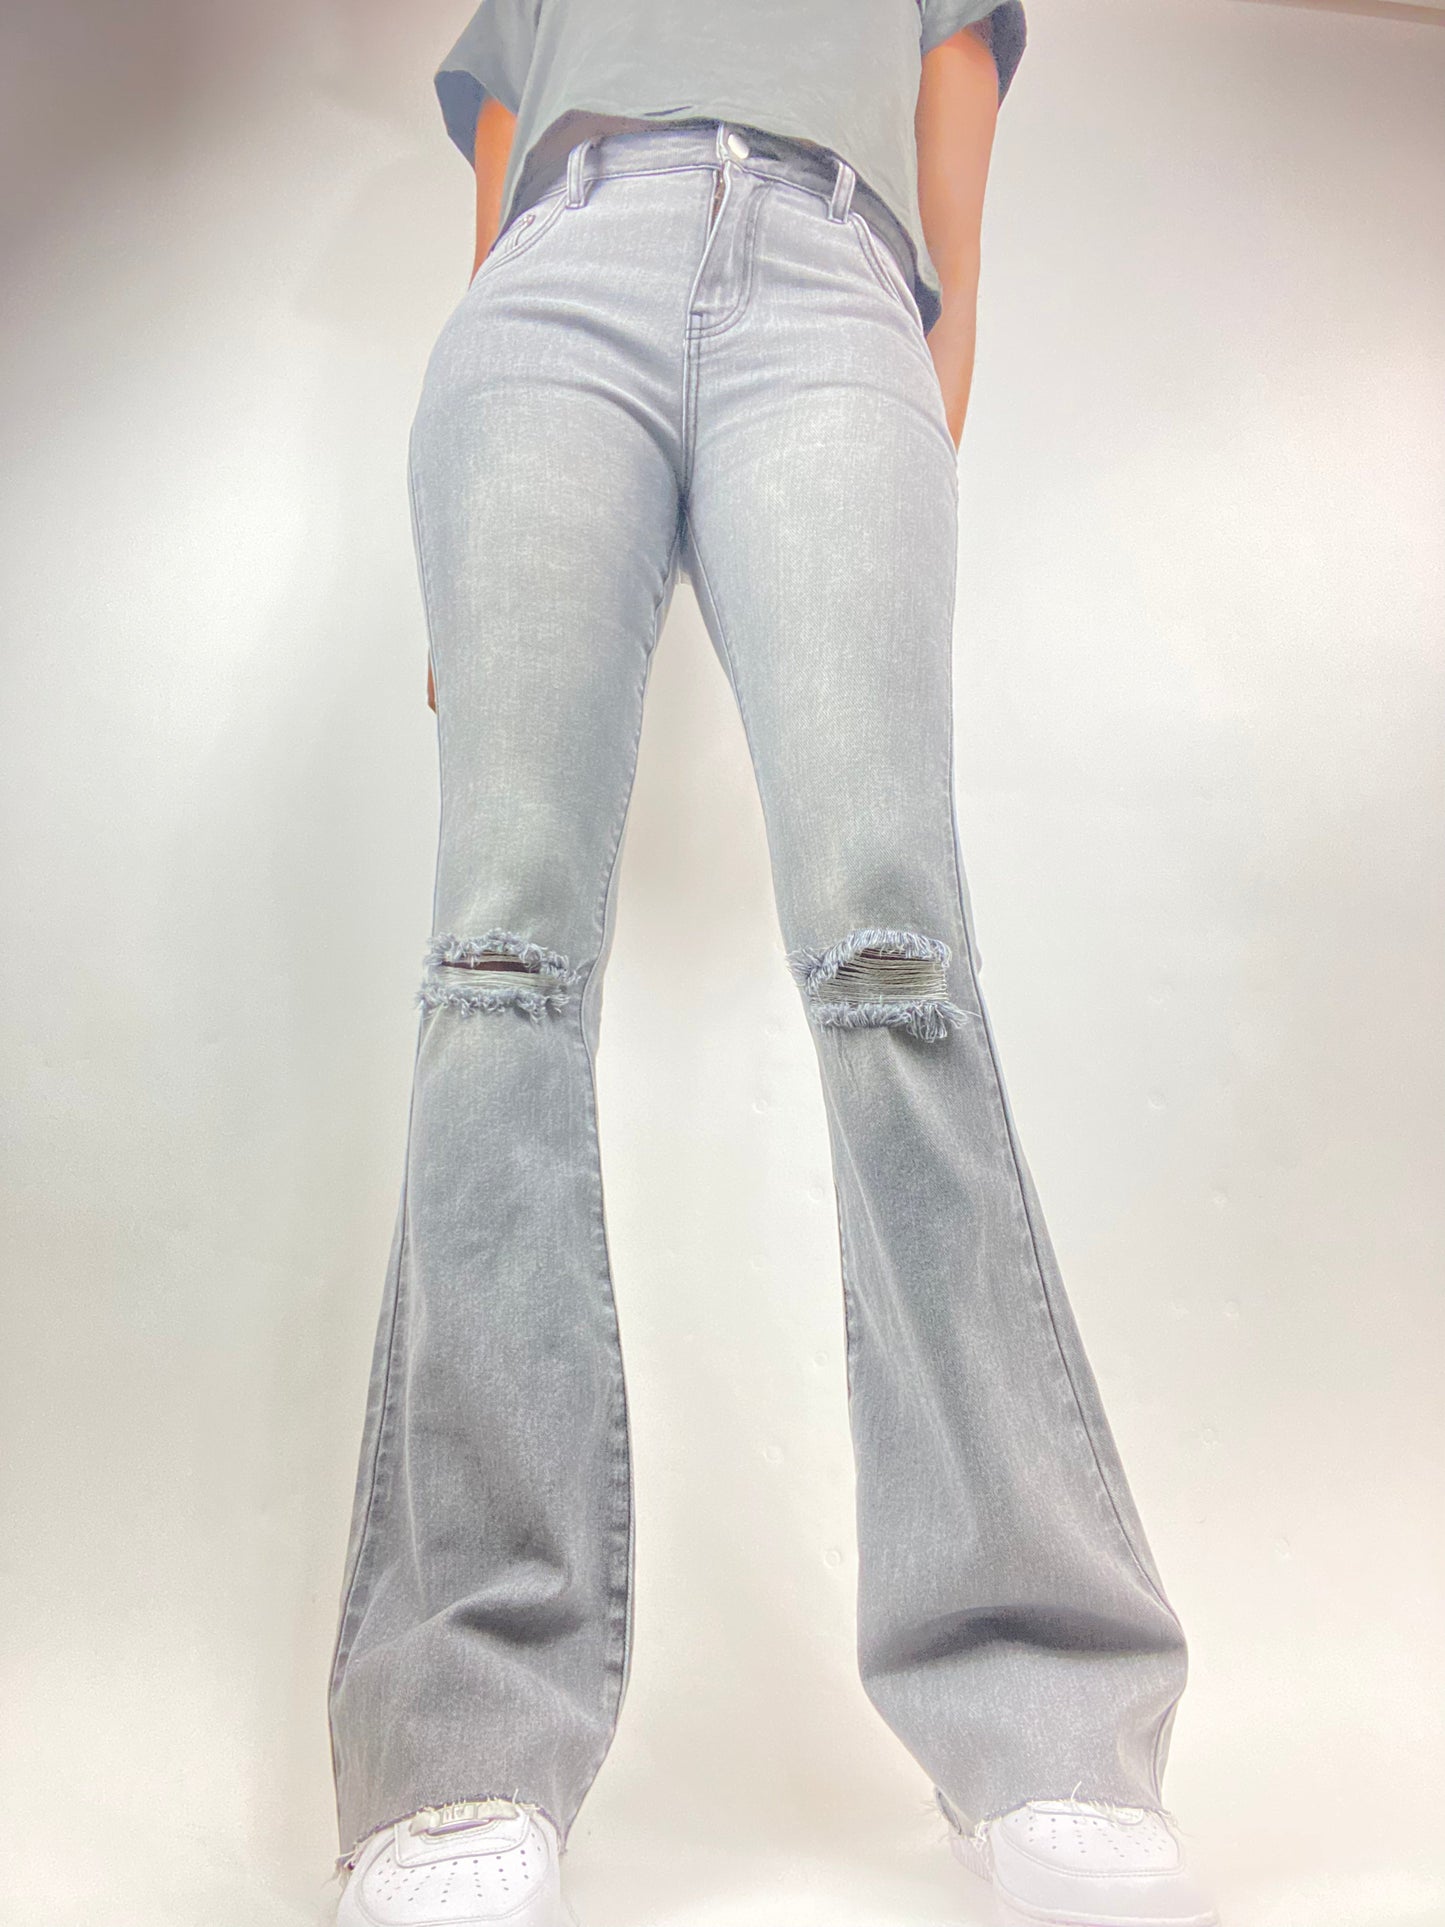 Tall Women's Flared Jeans